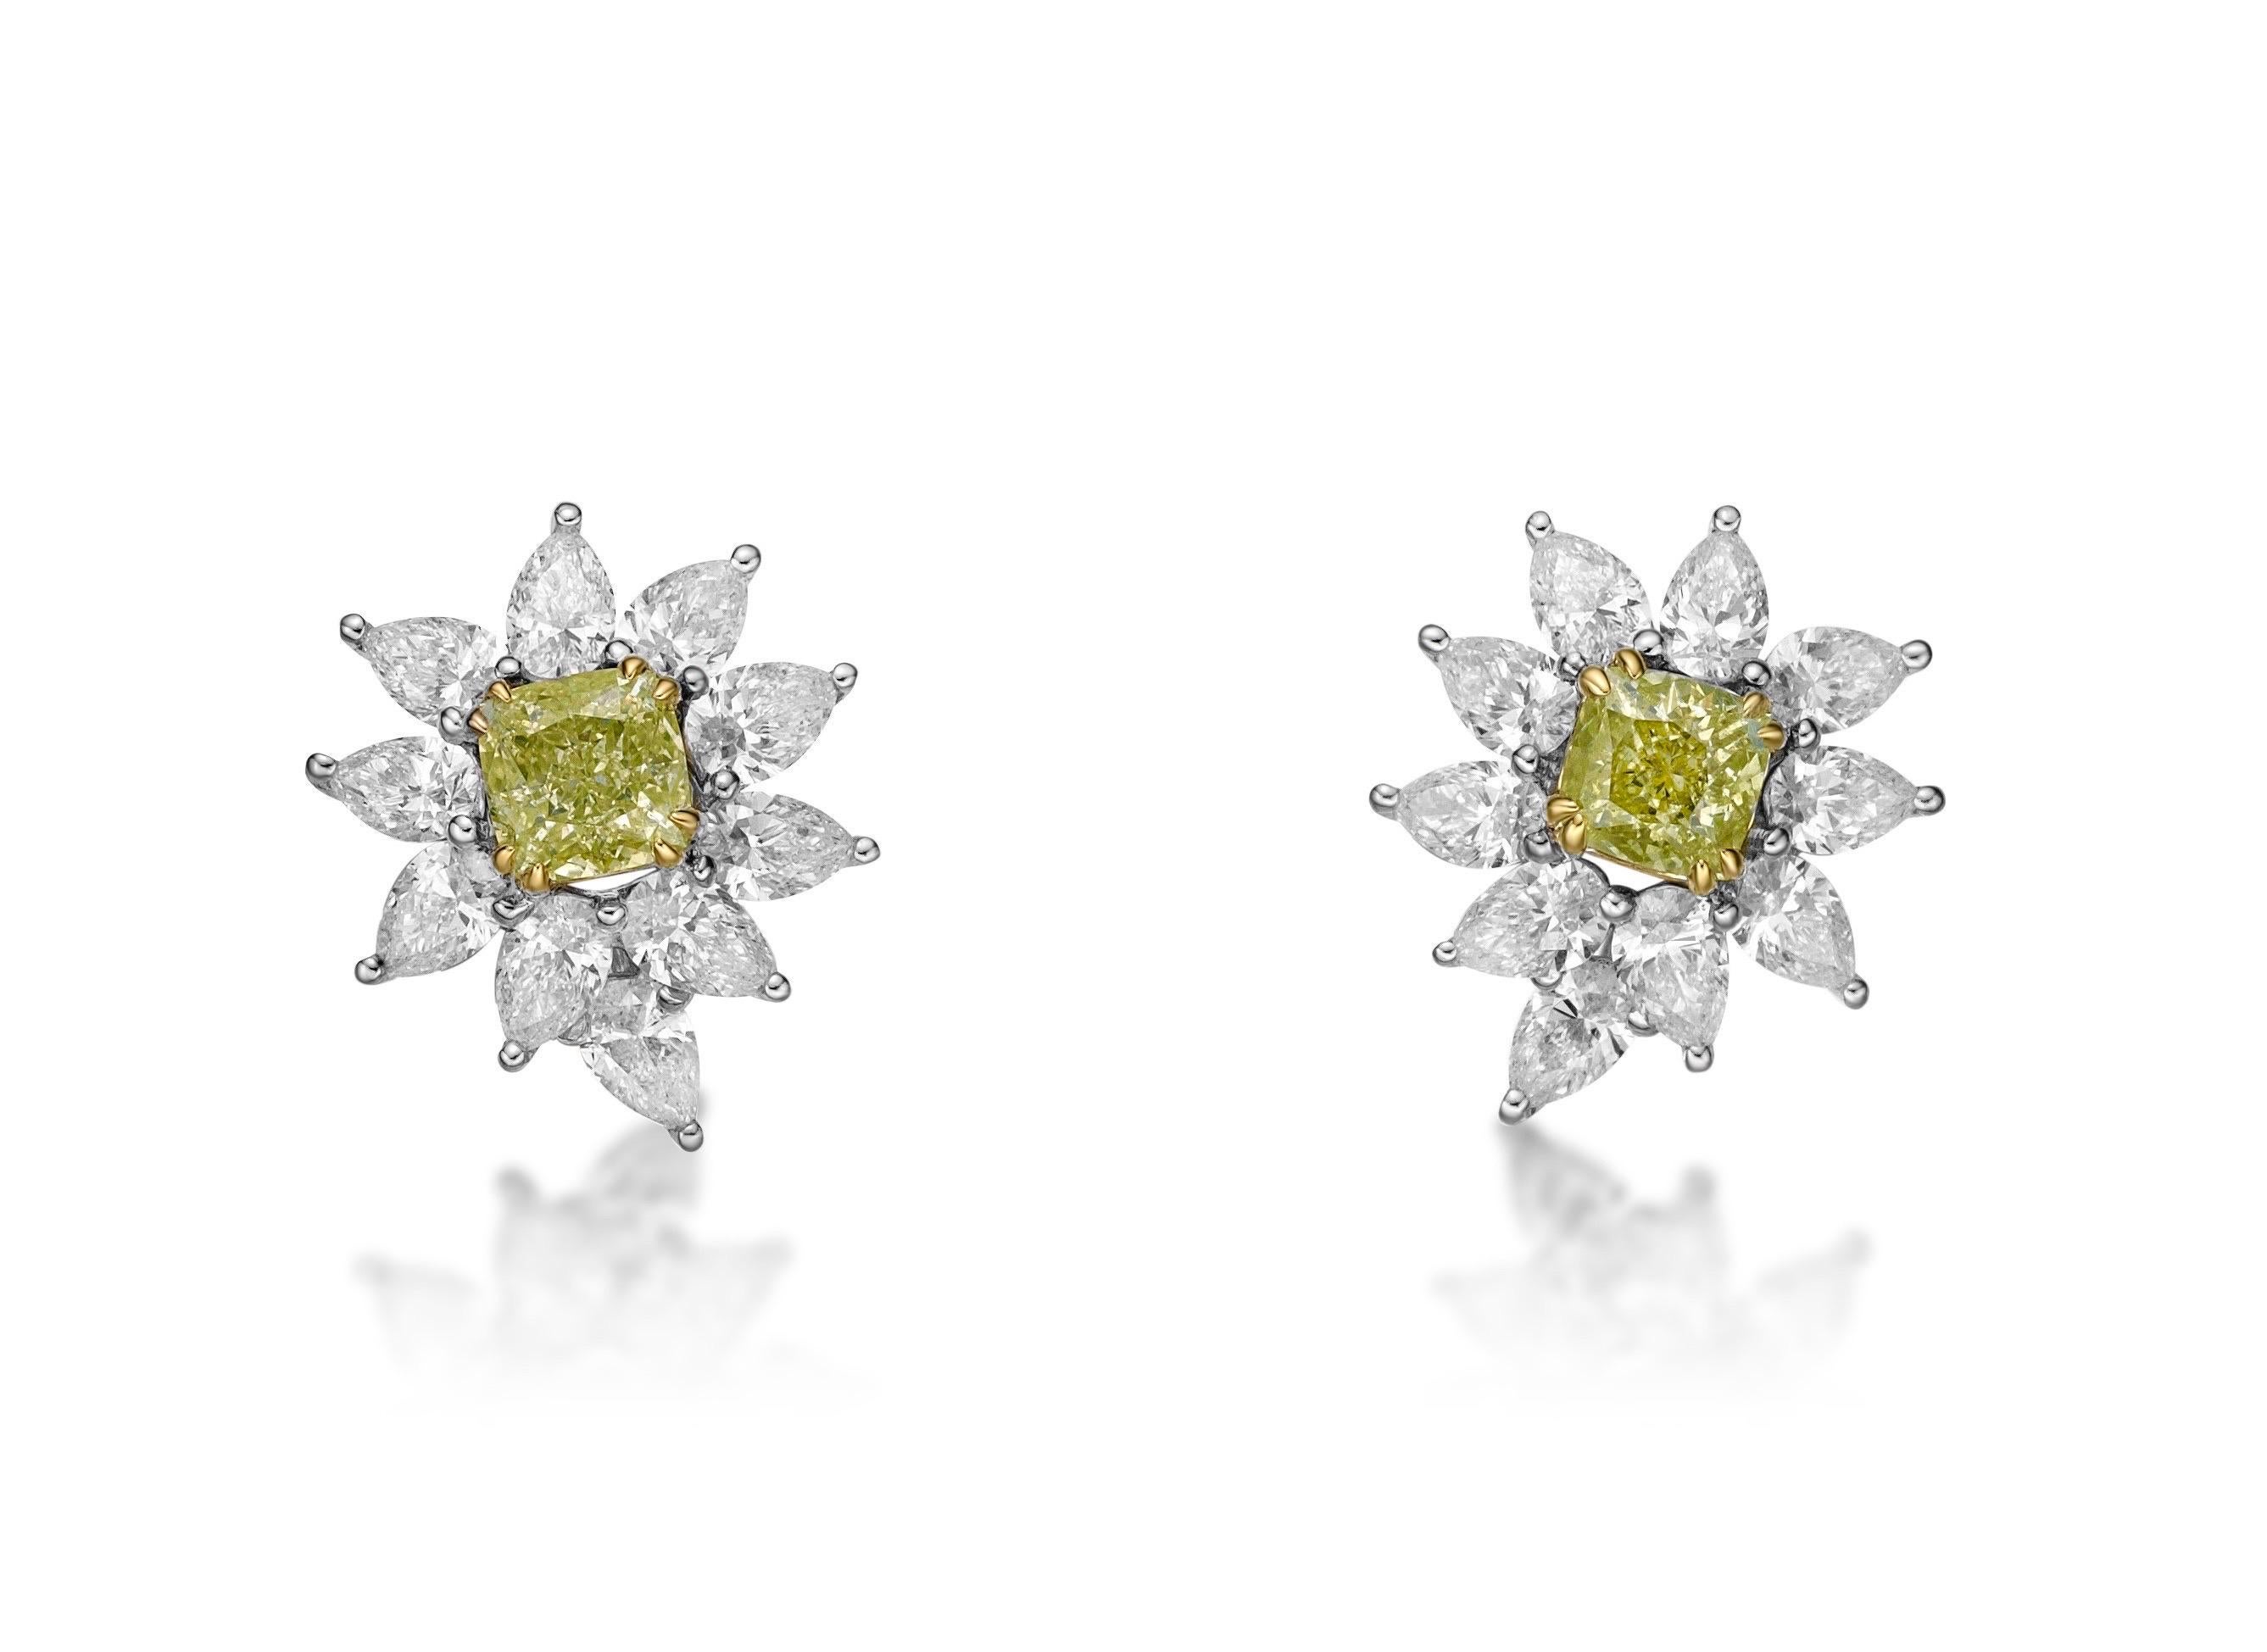 Featuring 2 center cushion diamonds 0.74ct FLGY and FGY 
20 pear shape diamonds 1.23cts colorless vs2 + 
From The Museum Vault at Emilio Jewelry Located on New York's iconic Fifth Avenue,
Hand made in the Emilio Jewelry Atelier, whom specializes in